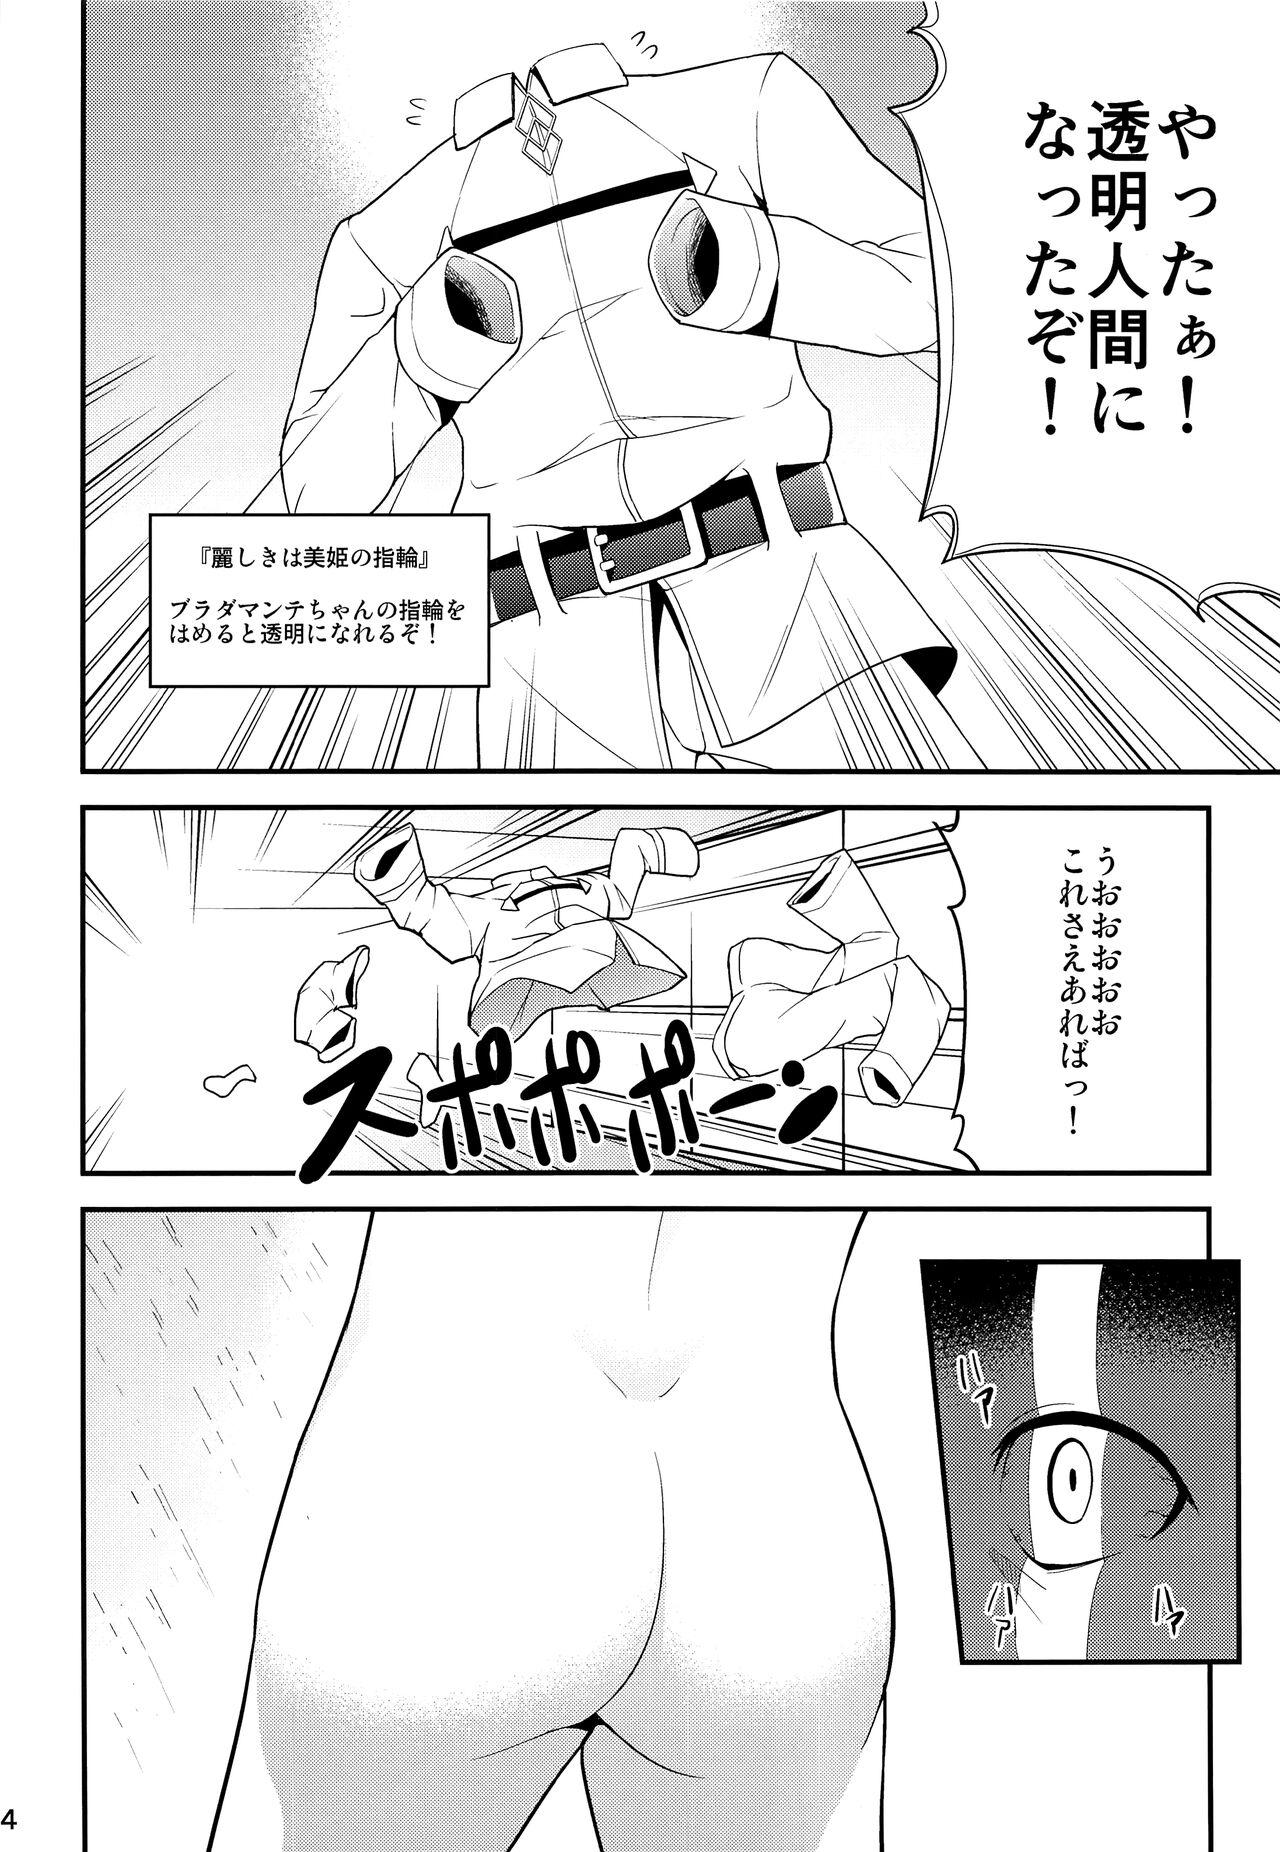 Best Blowjobs Ever Astolfo VS Toumei Ningen - Fate grand order Perrito - Page 3